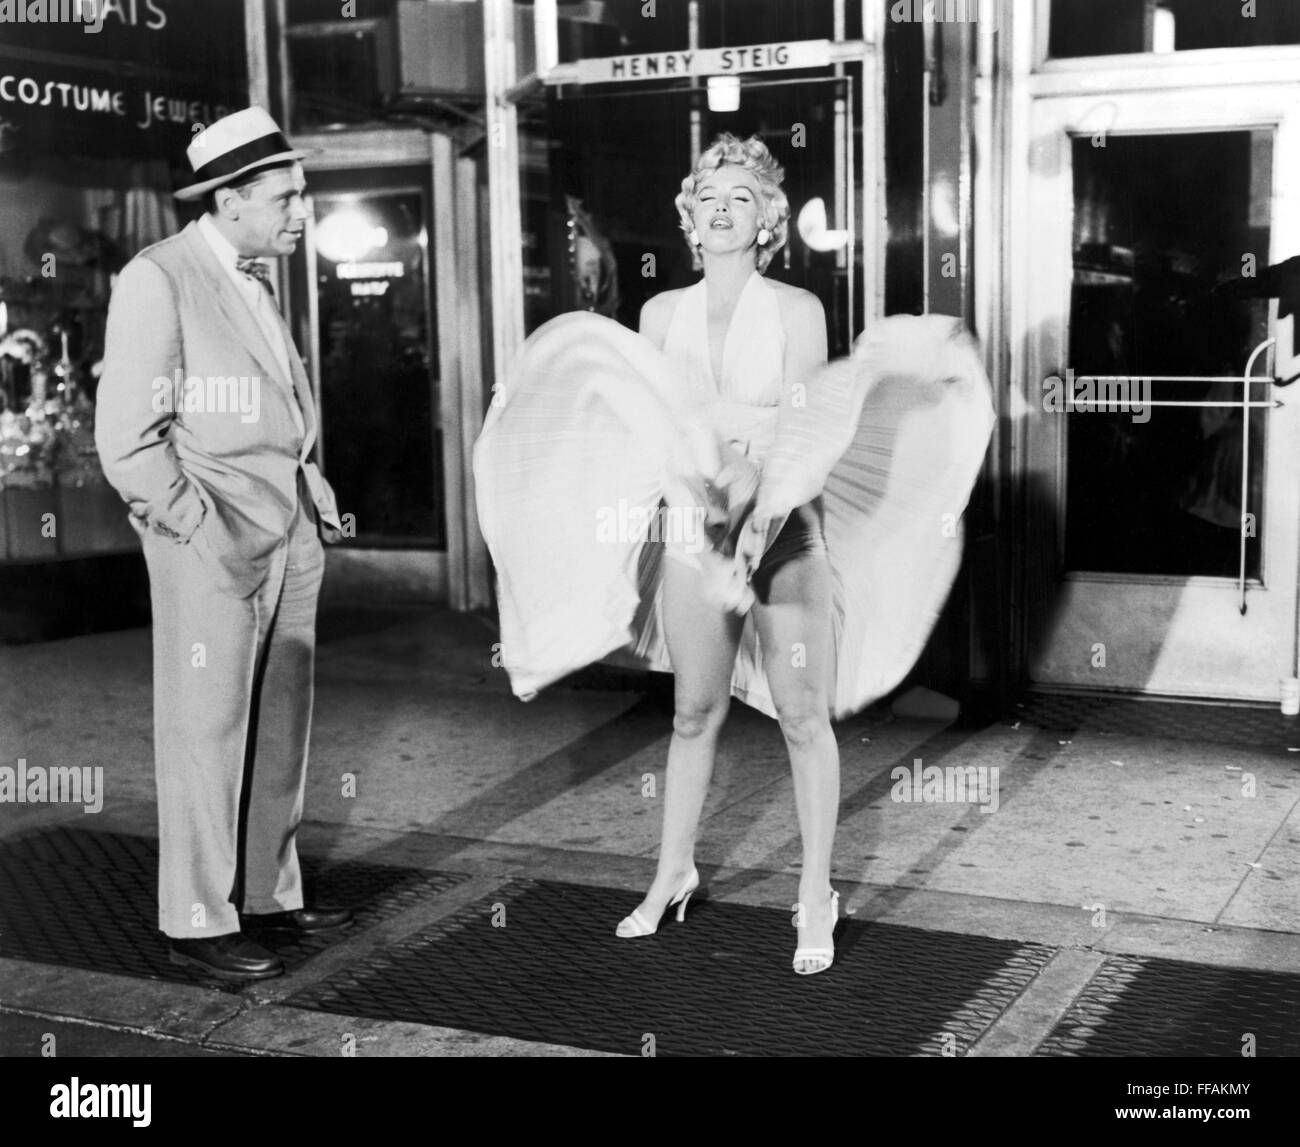 MARILYN MONROE (1926-1962). /nAmerican cinema actress. With Tom Ewell in a scene from The Seven Year Itch, 1955. Stock Photo